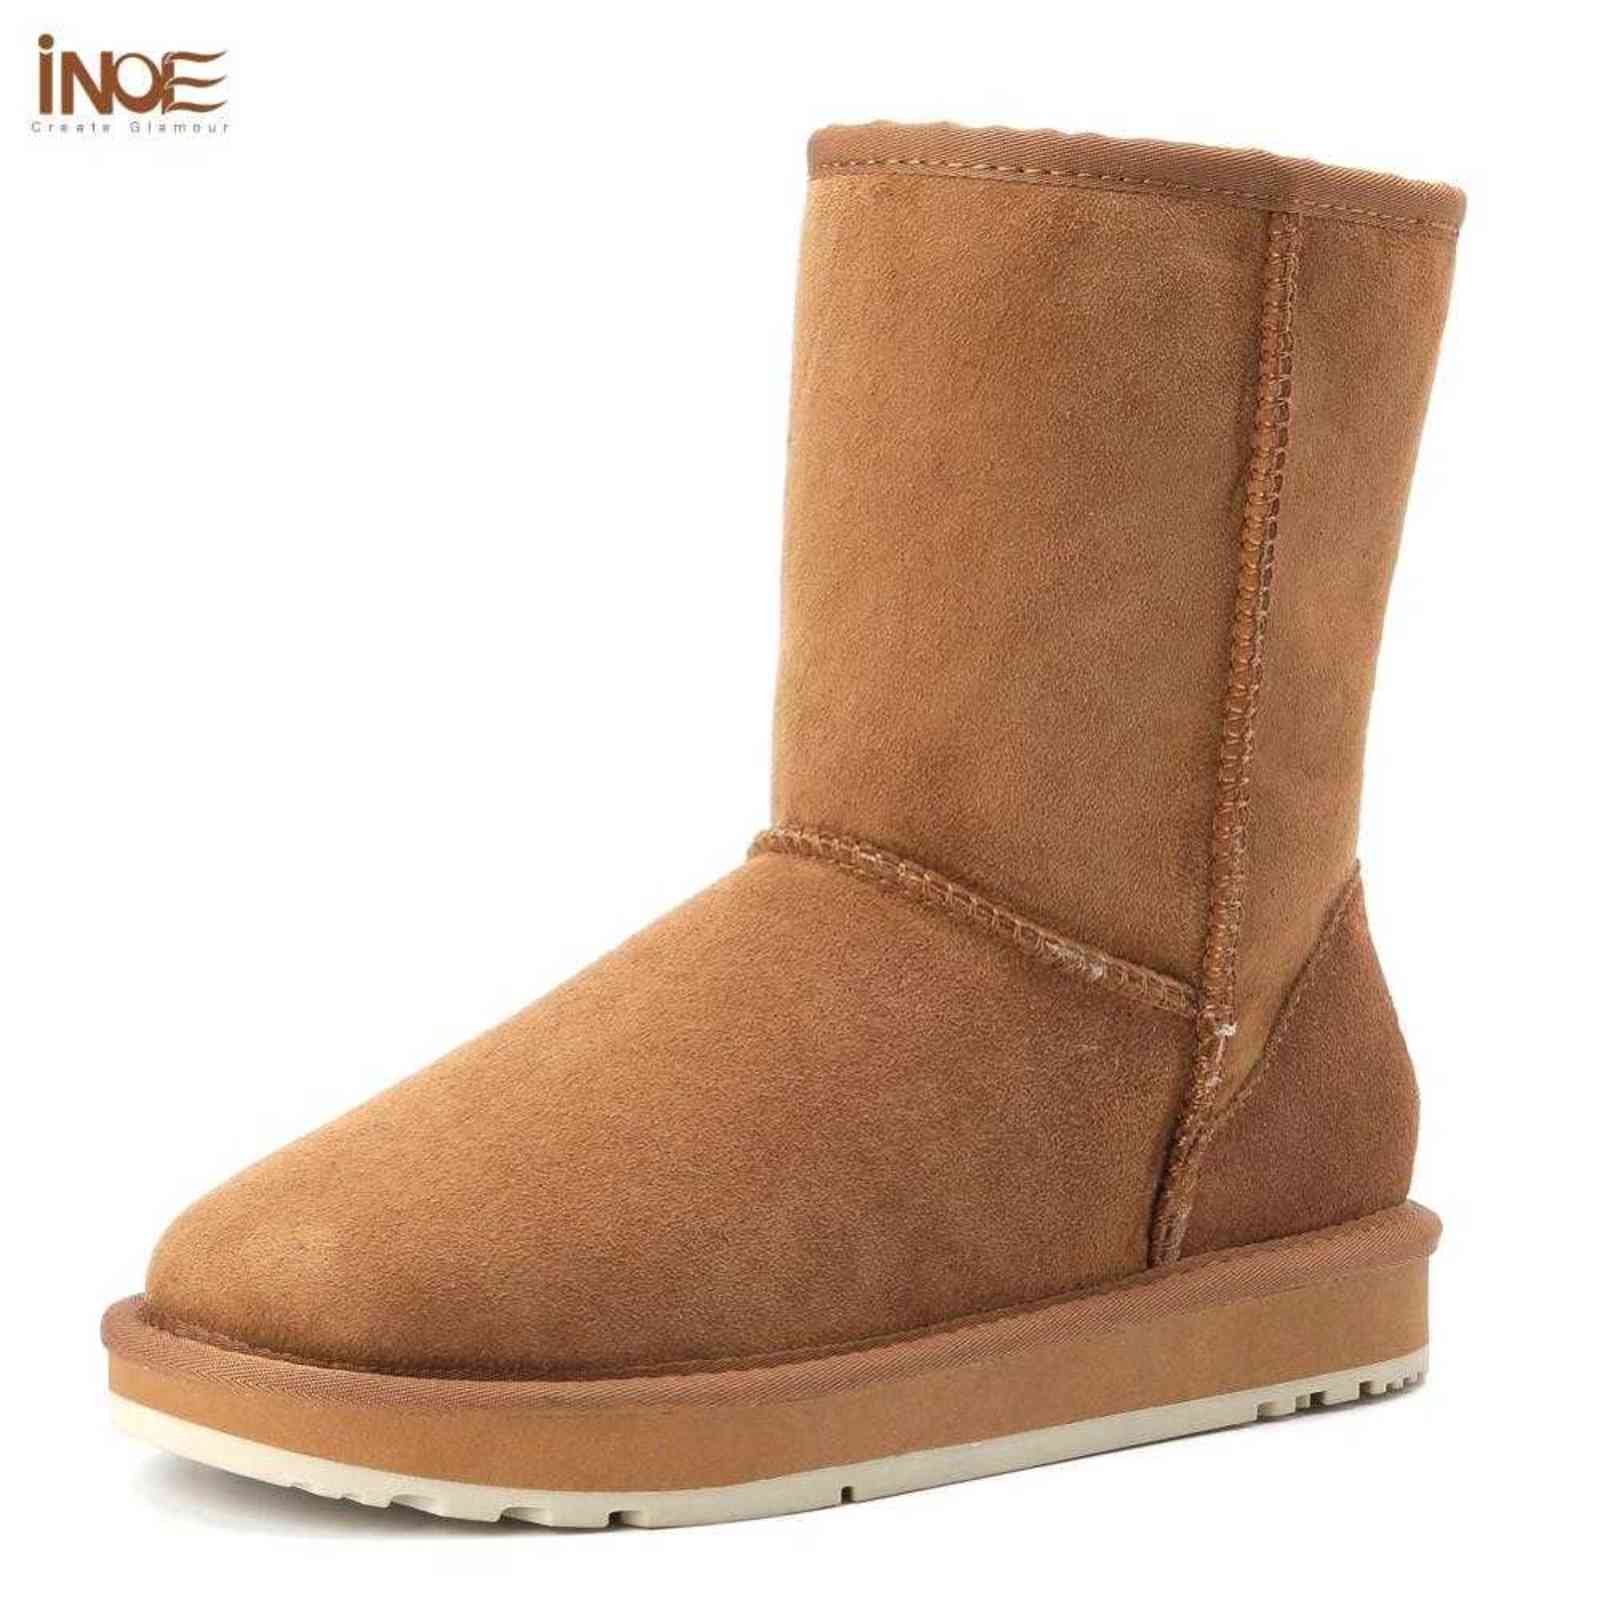 

INOE Real Sheepskin Suede Leather Woman Casual High Winter Snow Boots for Women Sheep Wool Fur Lined Warm Shoes Waterproof H1102, Black